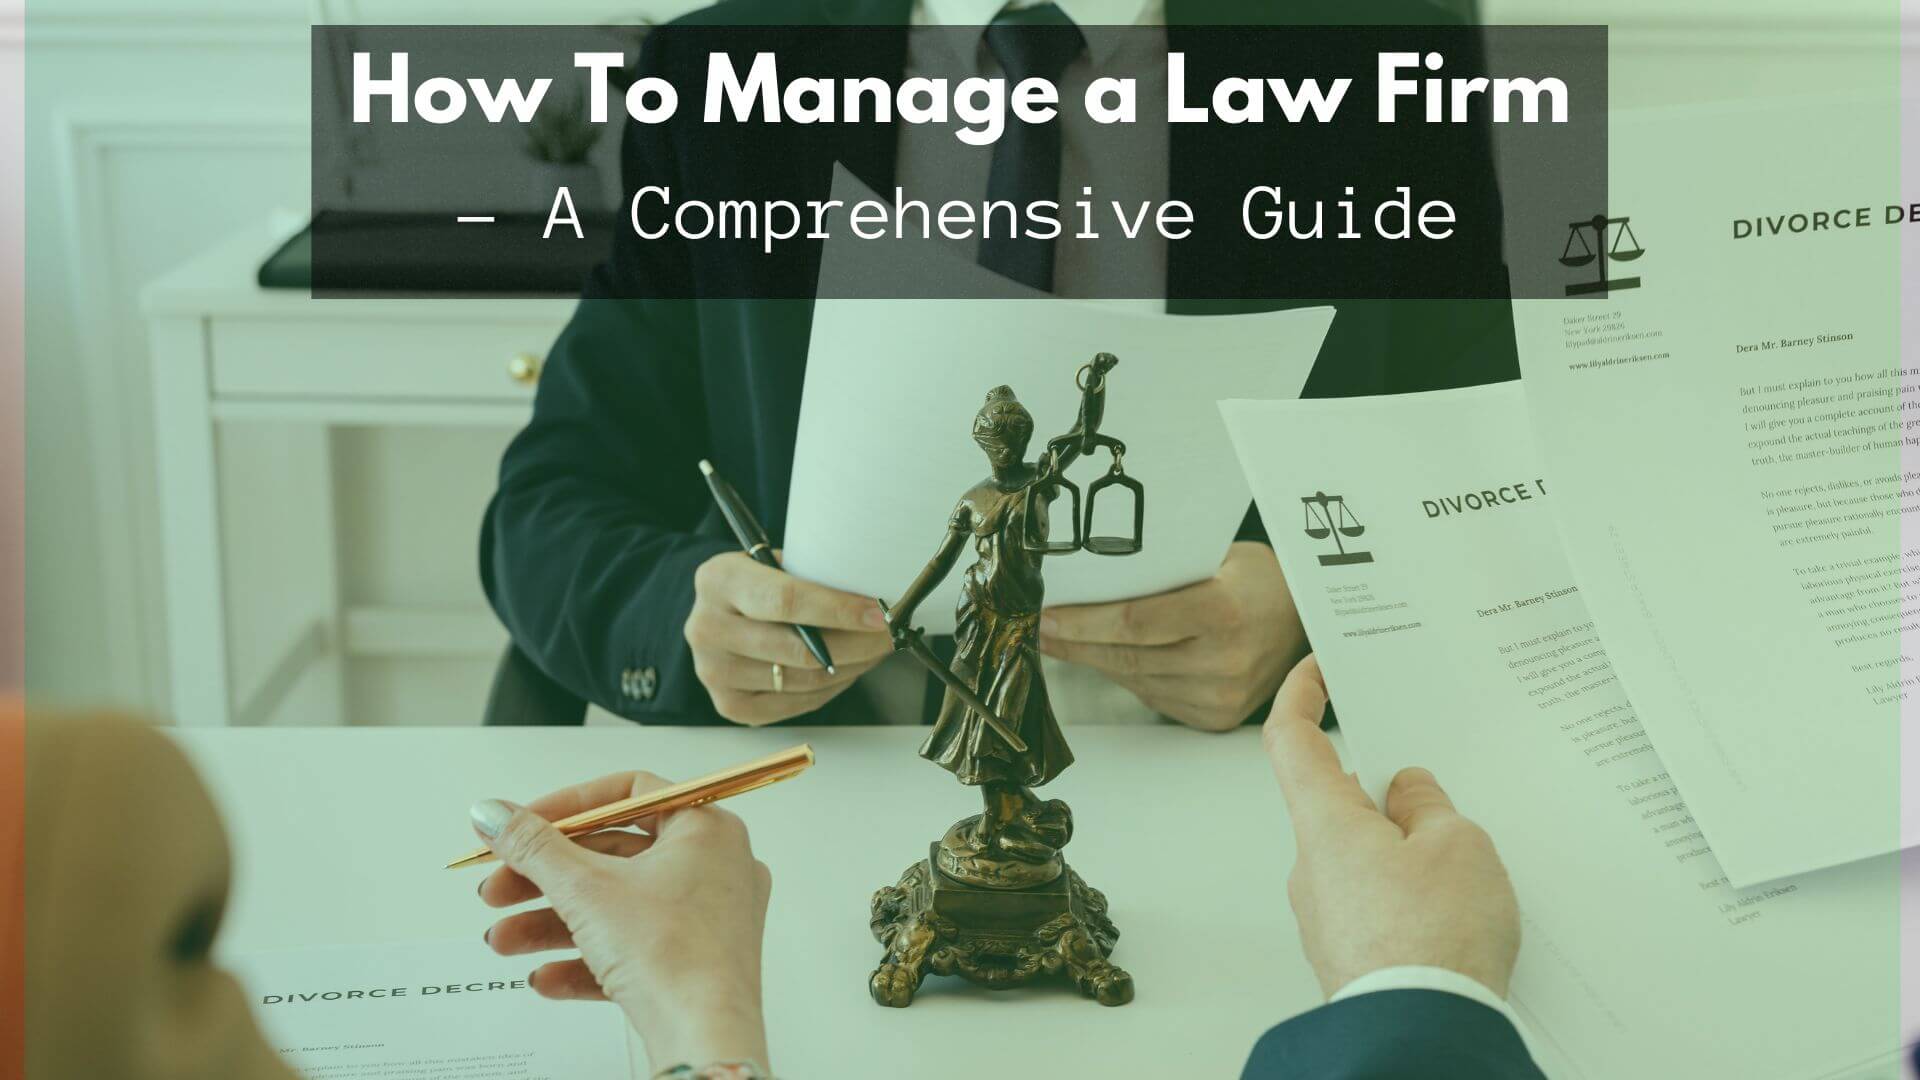 How to manage a law firm? Running a law firm business can be difficult to handle. Here's a comprehensive guide to managing a small law firm.